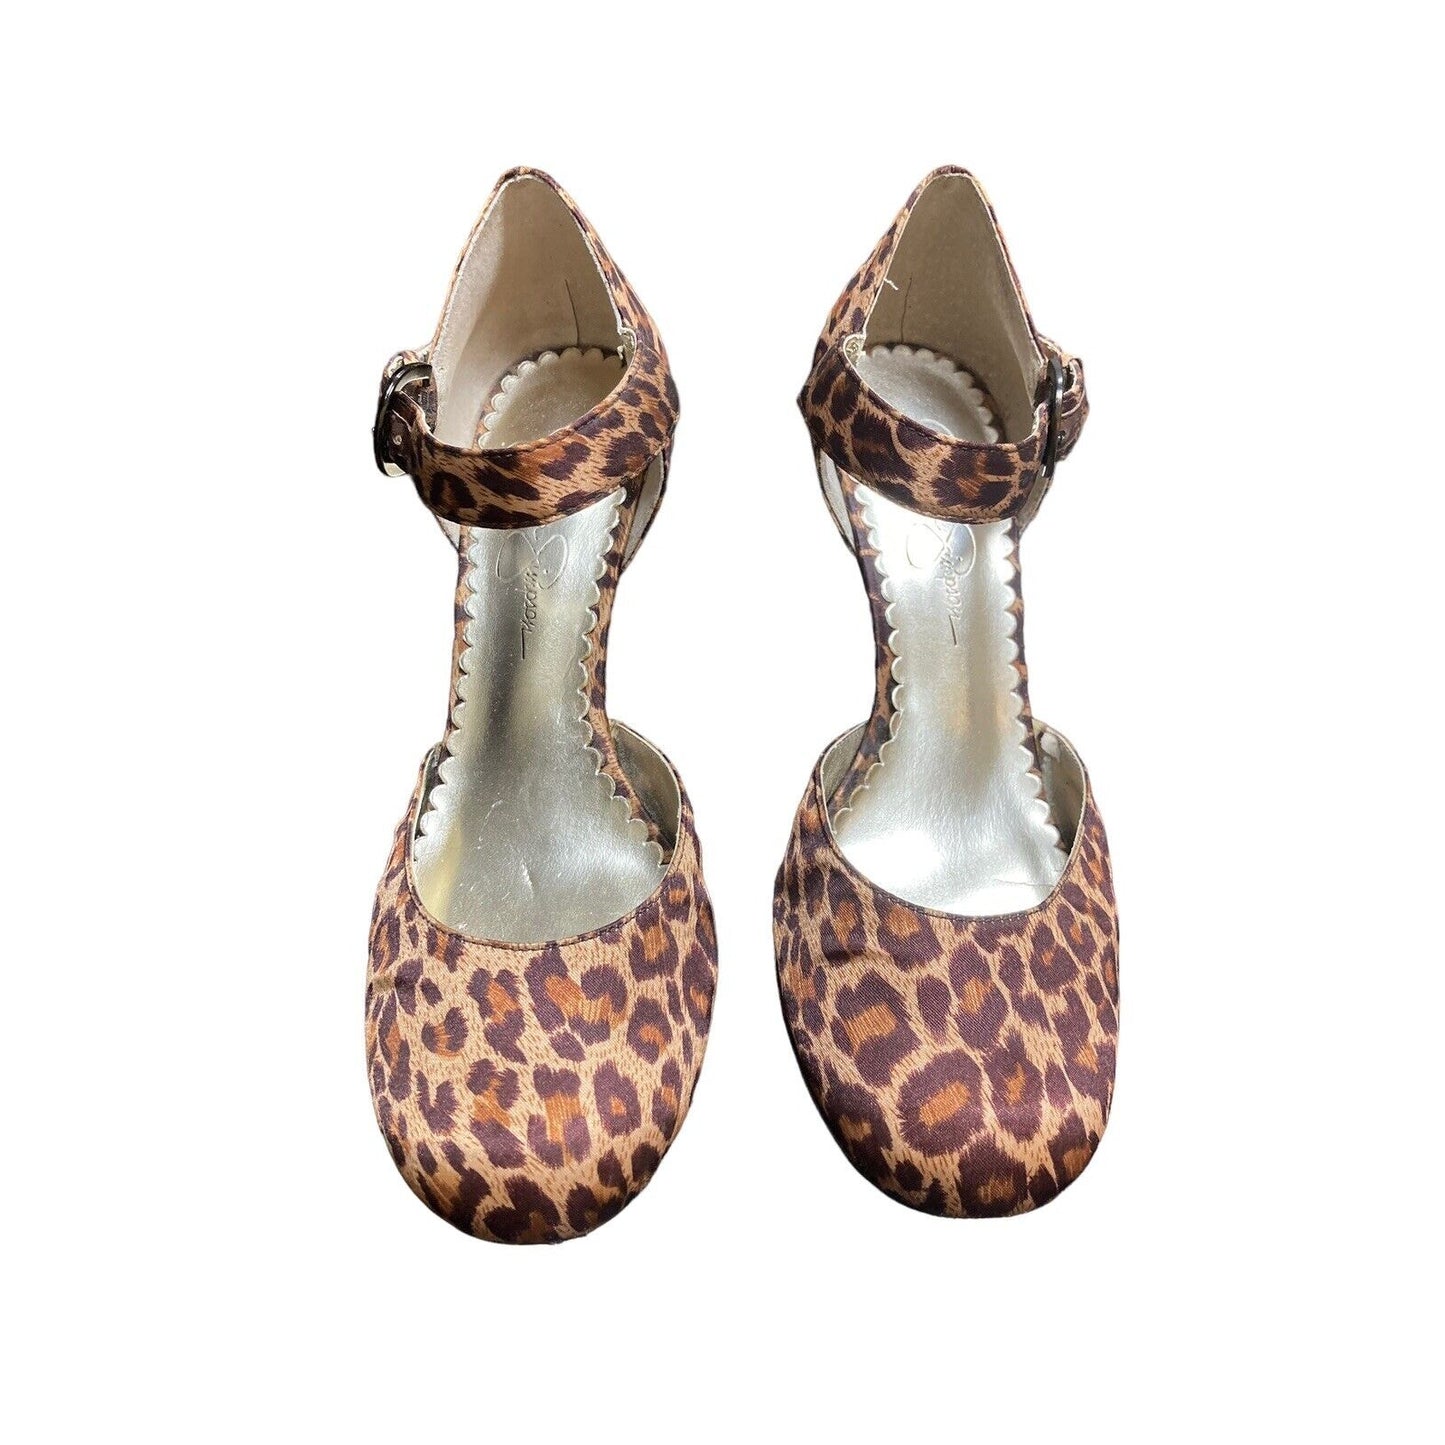 Jessica Simpson Haza Animal Leopard Print High Heel Ankle Strap Shoes Size 6.5